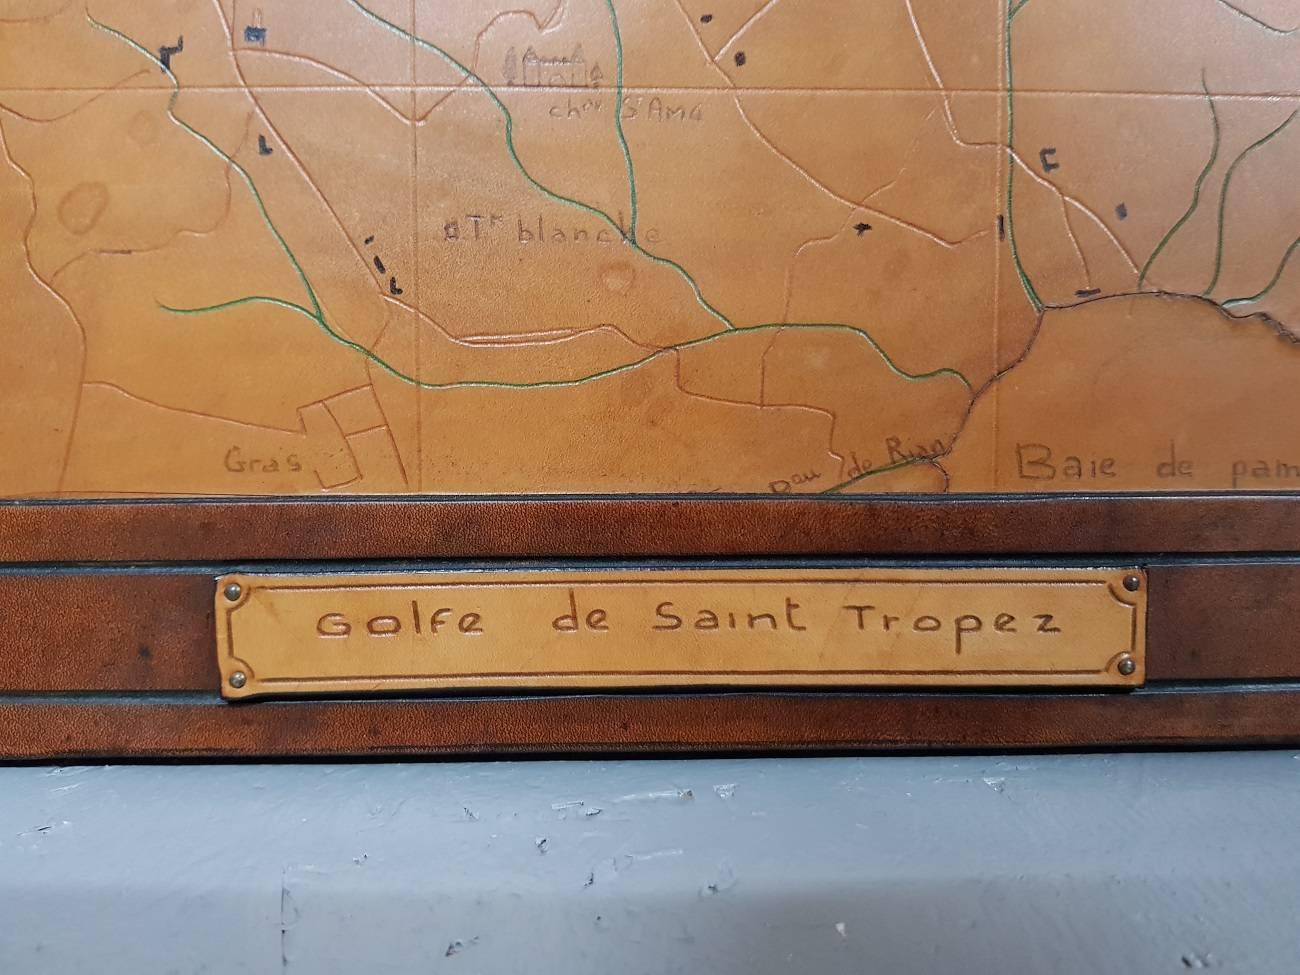 French vintage leather map of wooden panel from the 1960s-1970s of Golfe de St. Tropez with city's around it.

The measurements are,
Depth 2 cm/ 0.7 inch.
Width 104 cm/ 40.9 inch.
Height 74.5 cm/ 29.3 inch.
      